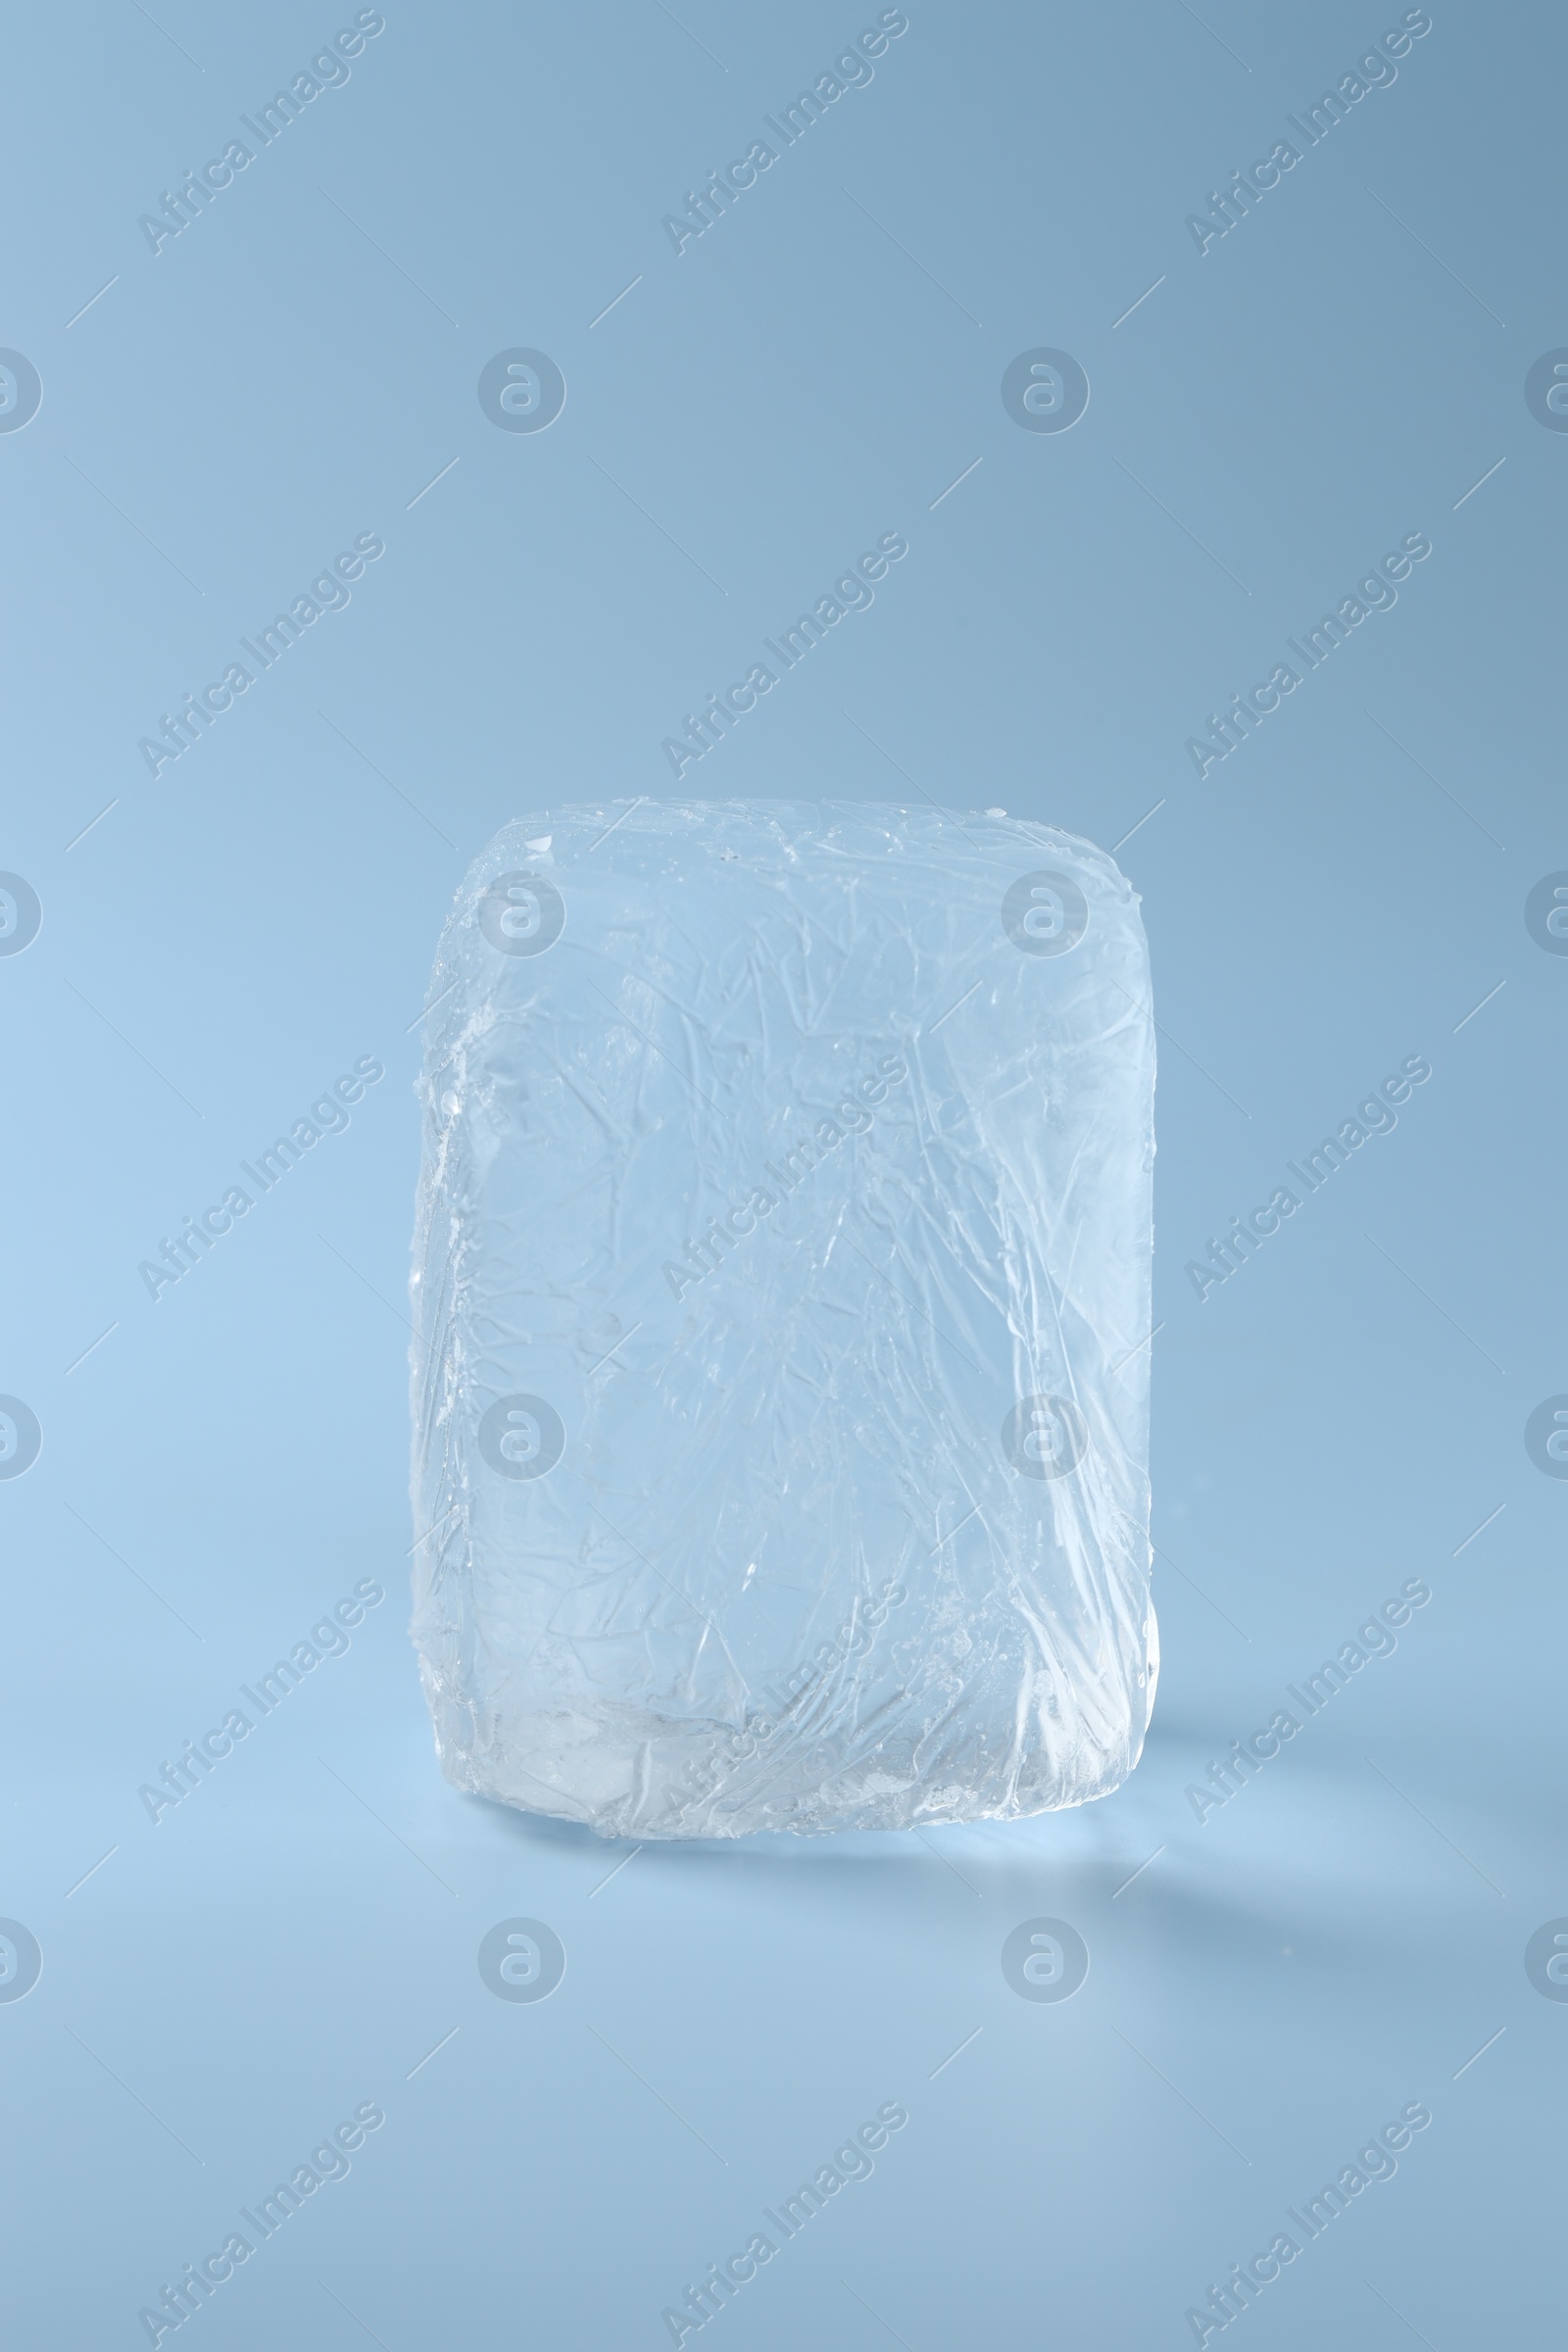 Photo of Block of clear ice on light blue background